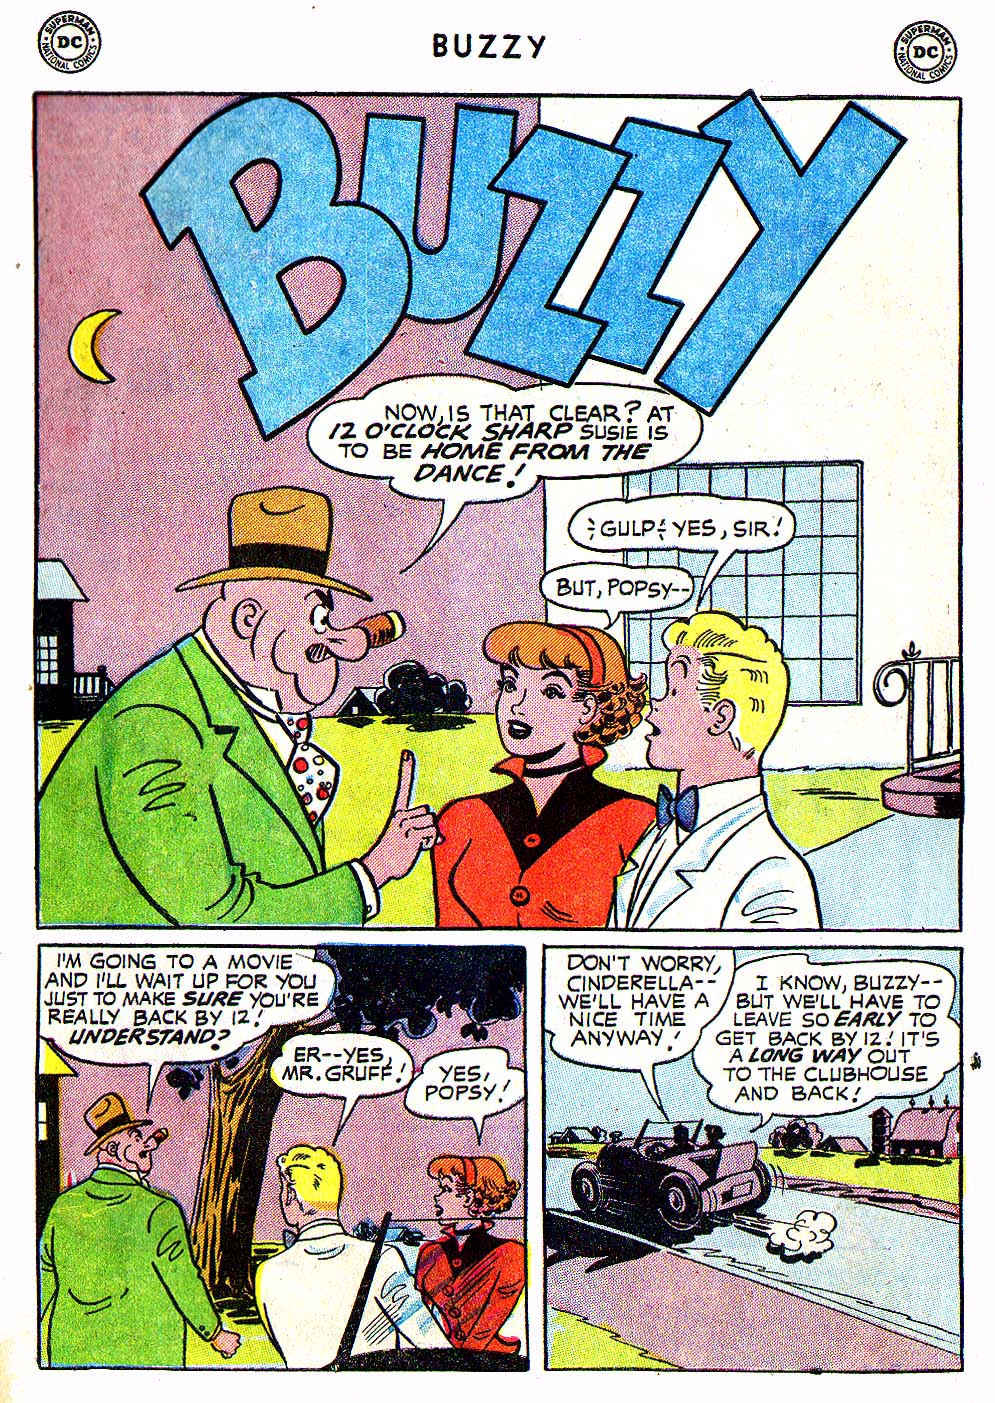 Read online Buzzy comic -  Issue #61 - 10